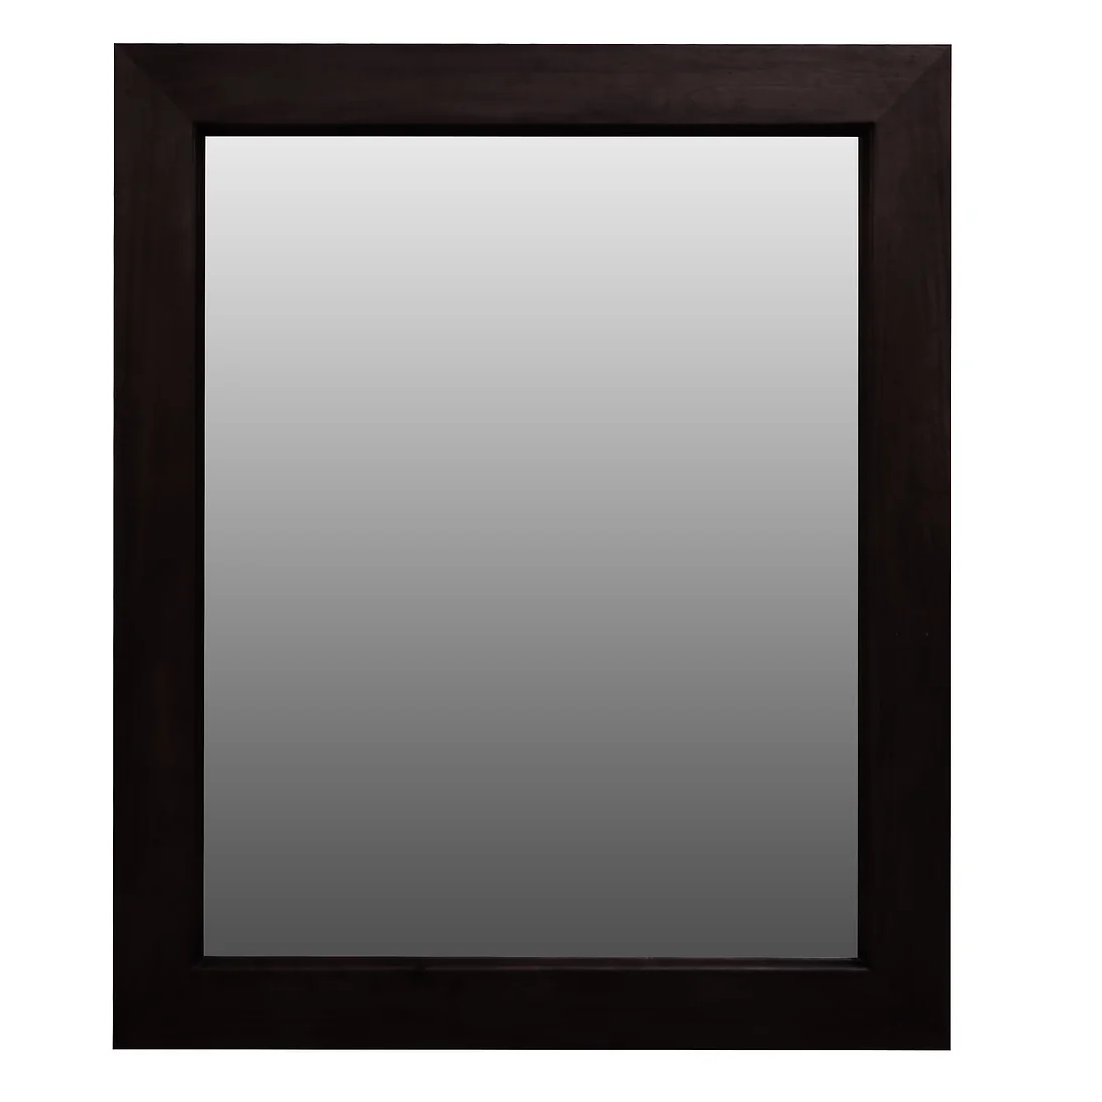 Ascort Solid Mahogany Frame Mirror without Stud in Chocolate - 120x100cm - Notbrand